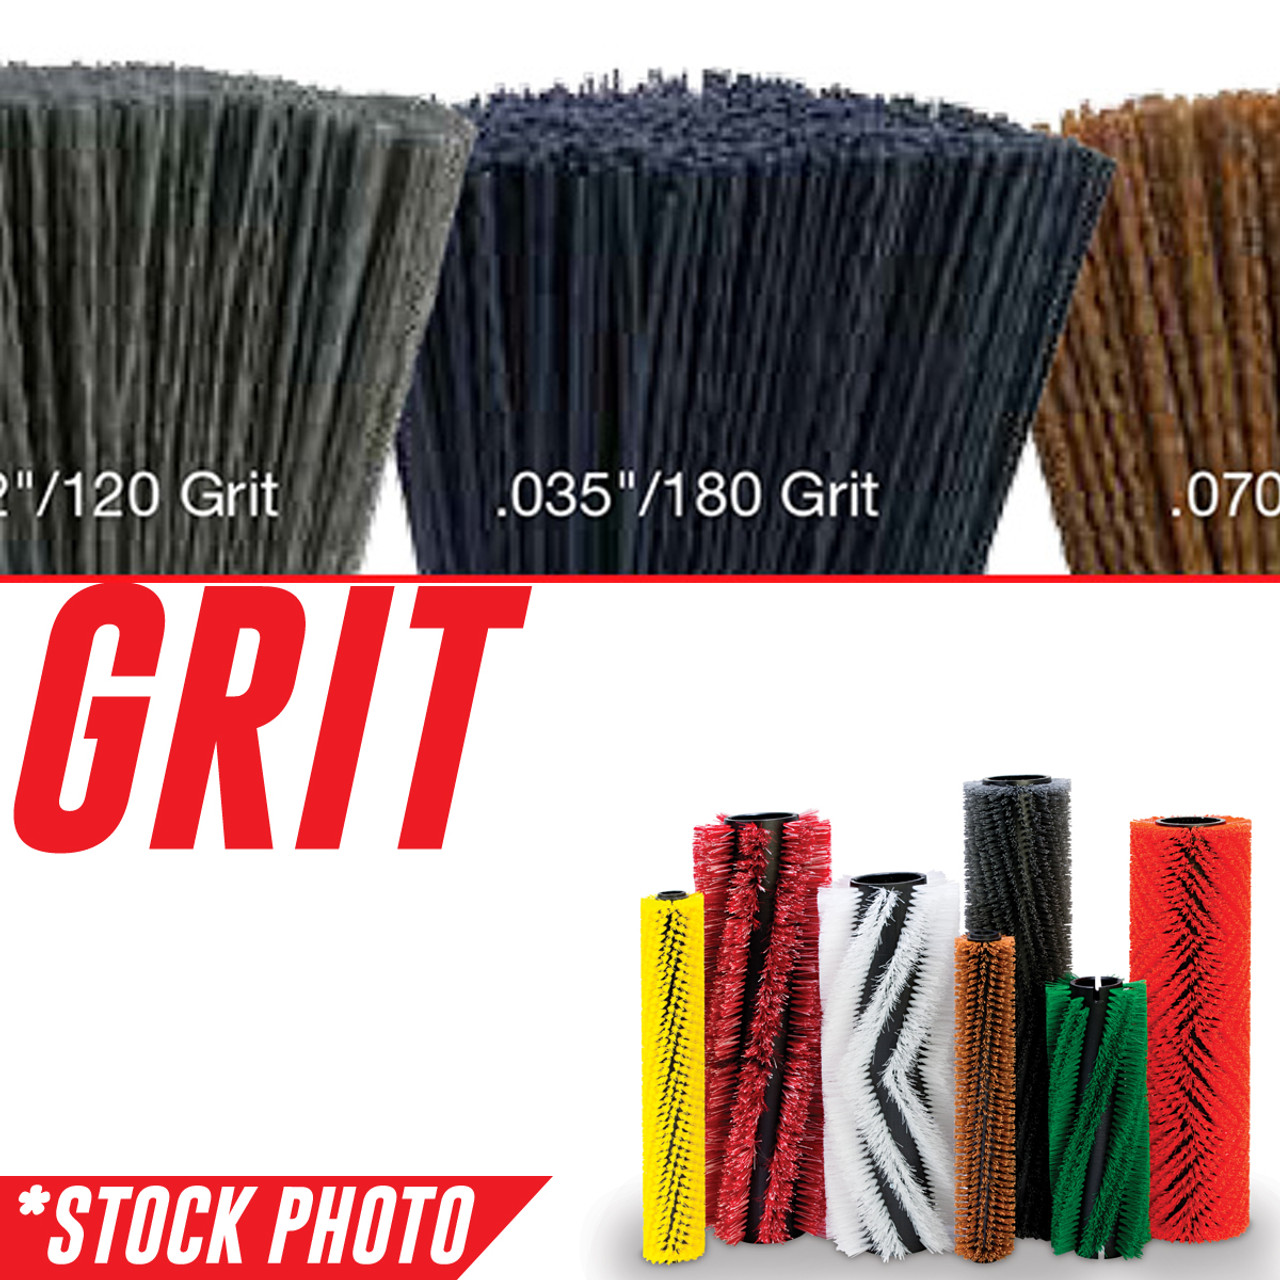 325-821S: 32" Cylindrical Brush 16 Single Row .050"/80 Grit fits Factory Cat Models GTX 34, Magnum 34